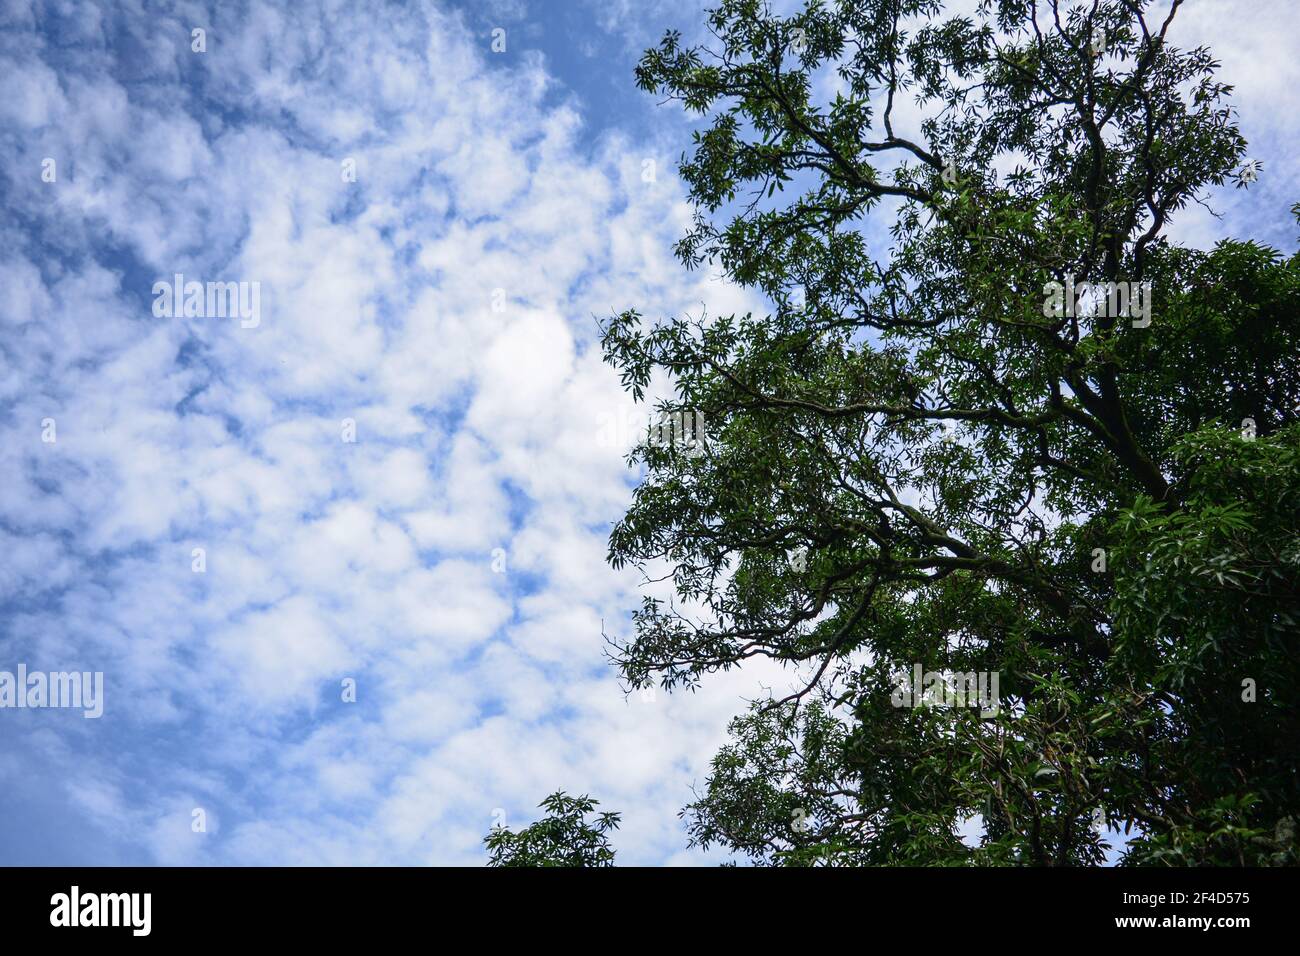 A tree under a blue sky with clouds in it Stock Photo